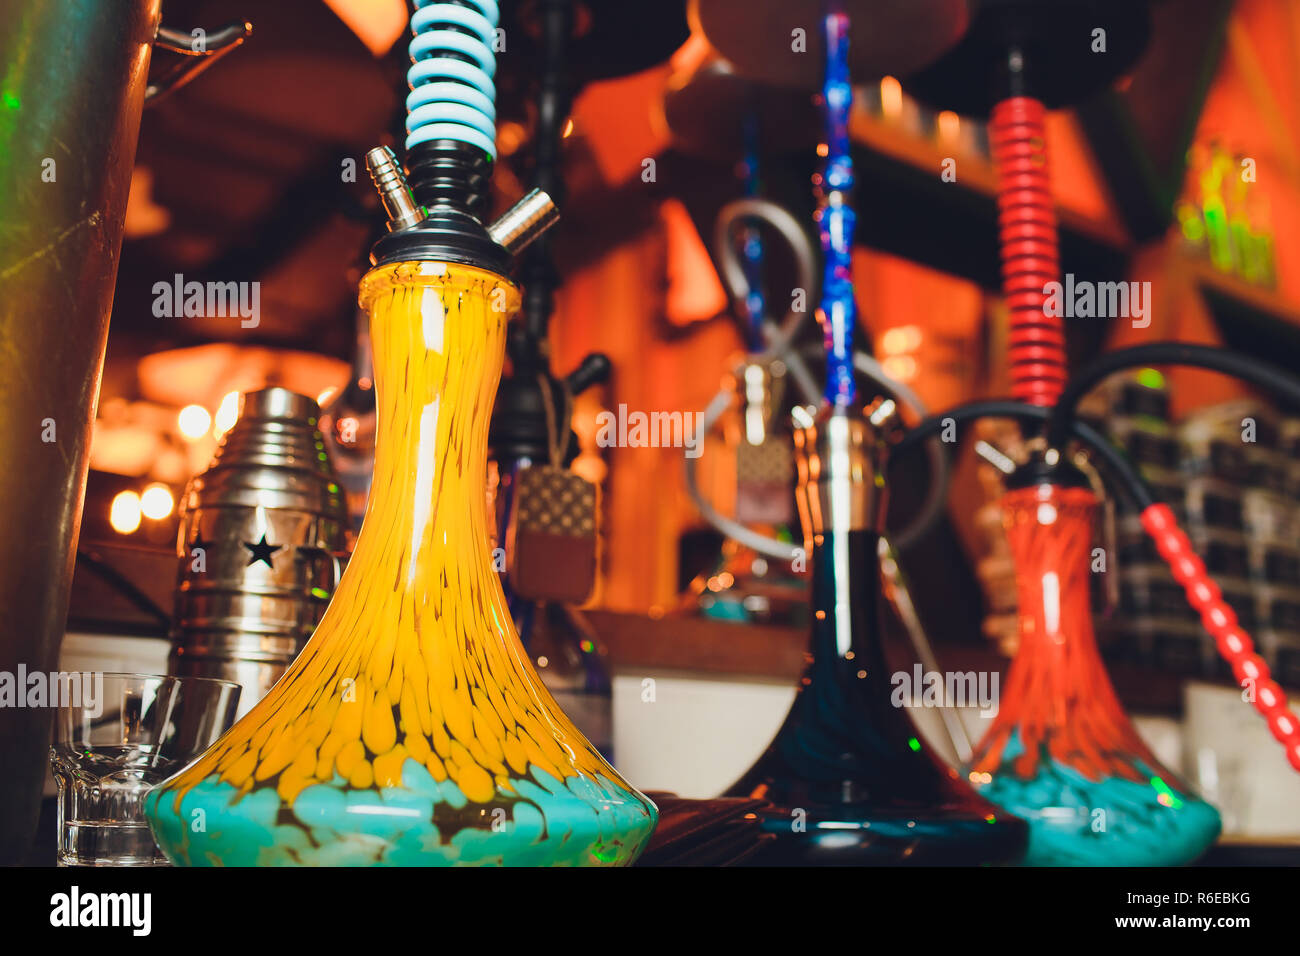 group of red hookahs shisha on table in interior. Stock Photo